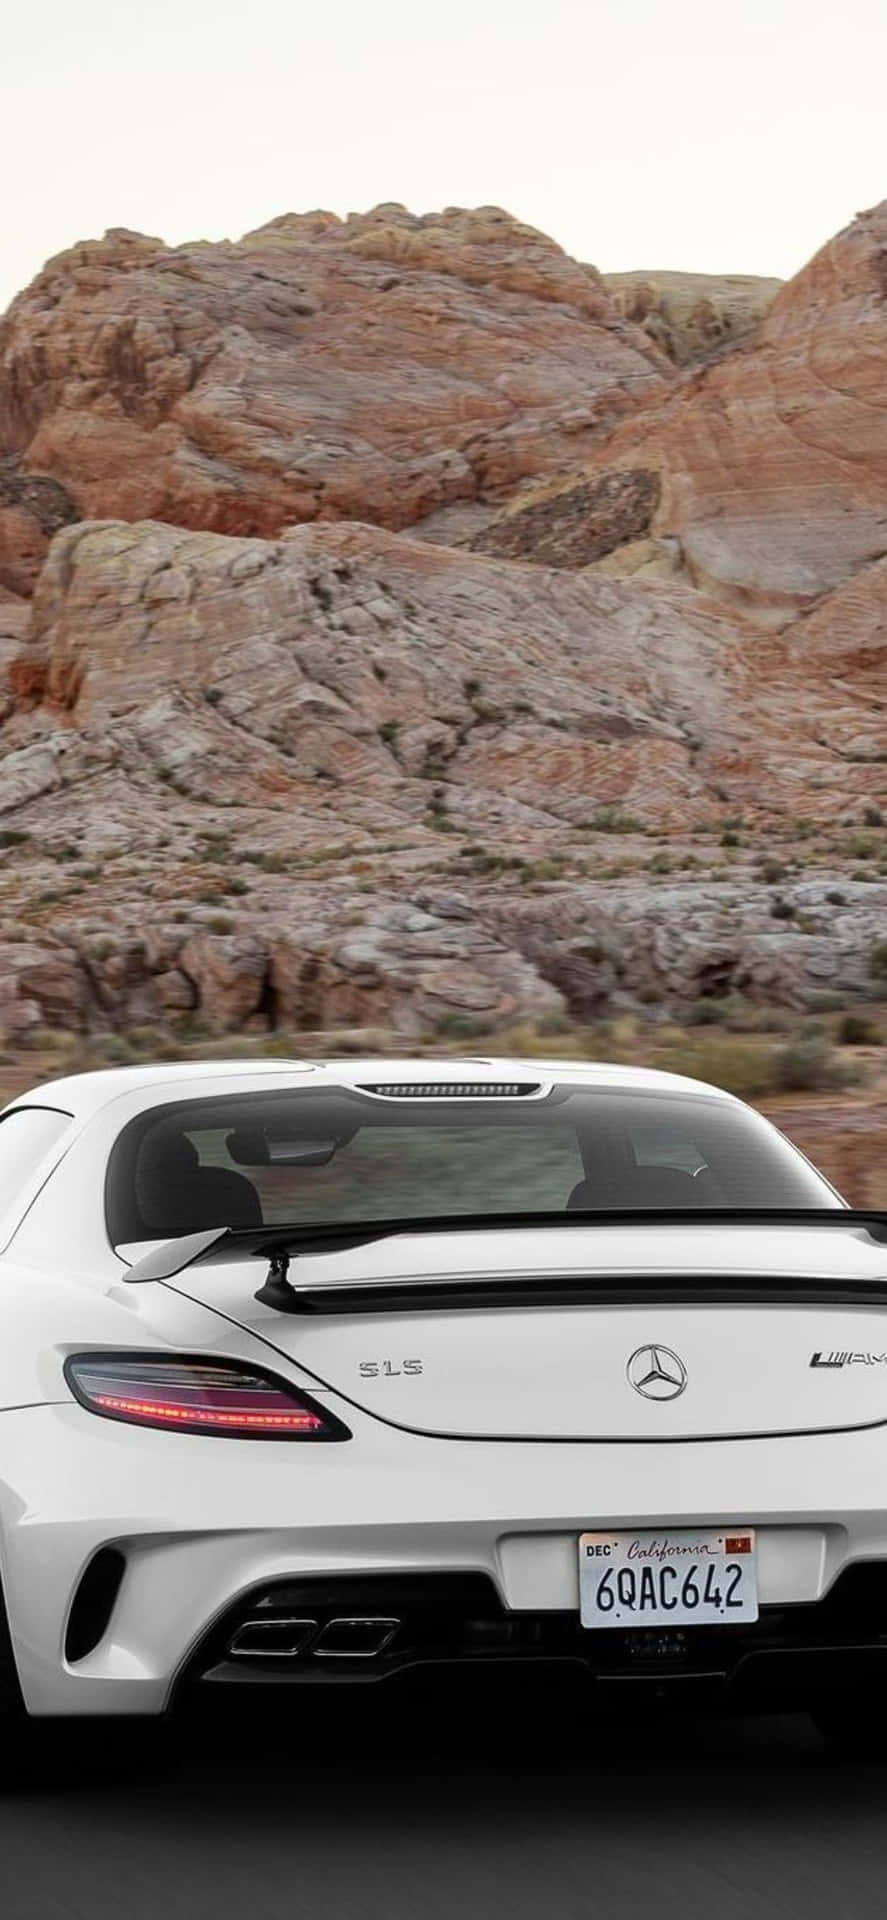 iPhone that lives up to the standard of Mercedes-Benz Wallpaper